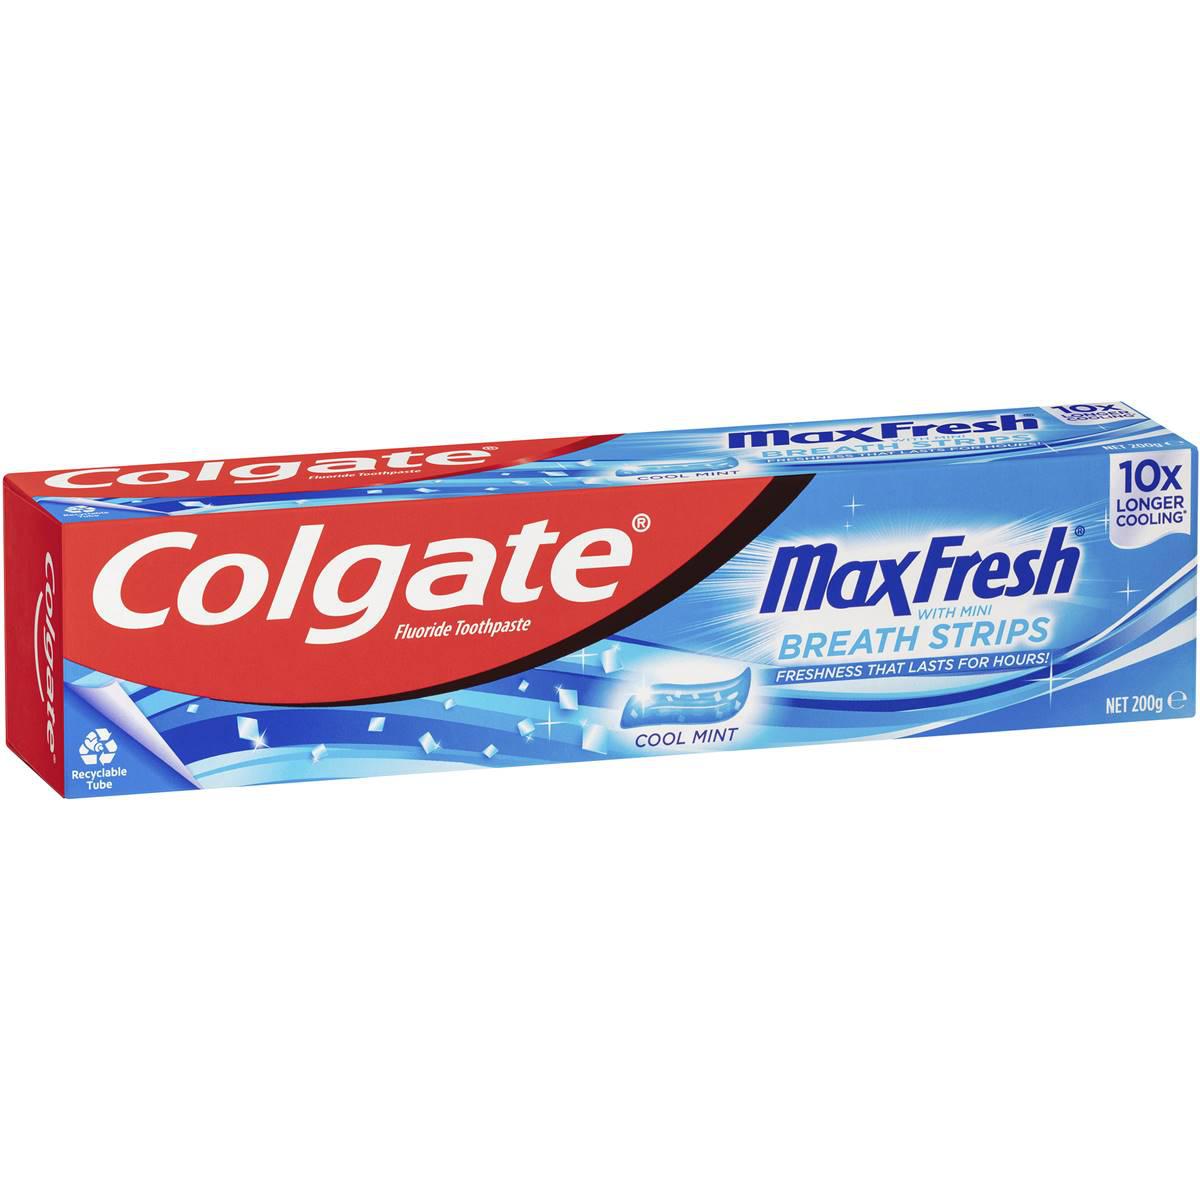 Colgate Maxfresh Cool Mint Toothpaste 200g